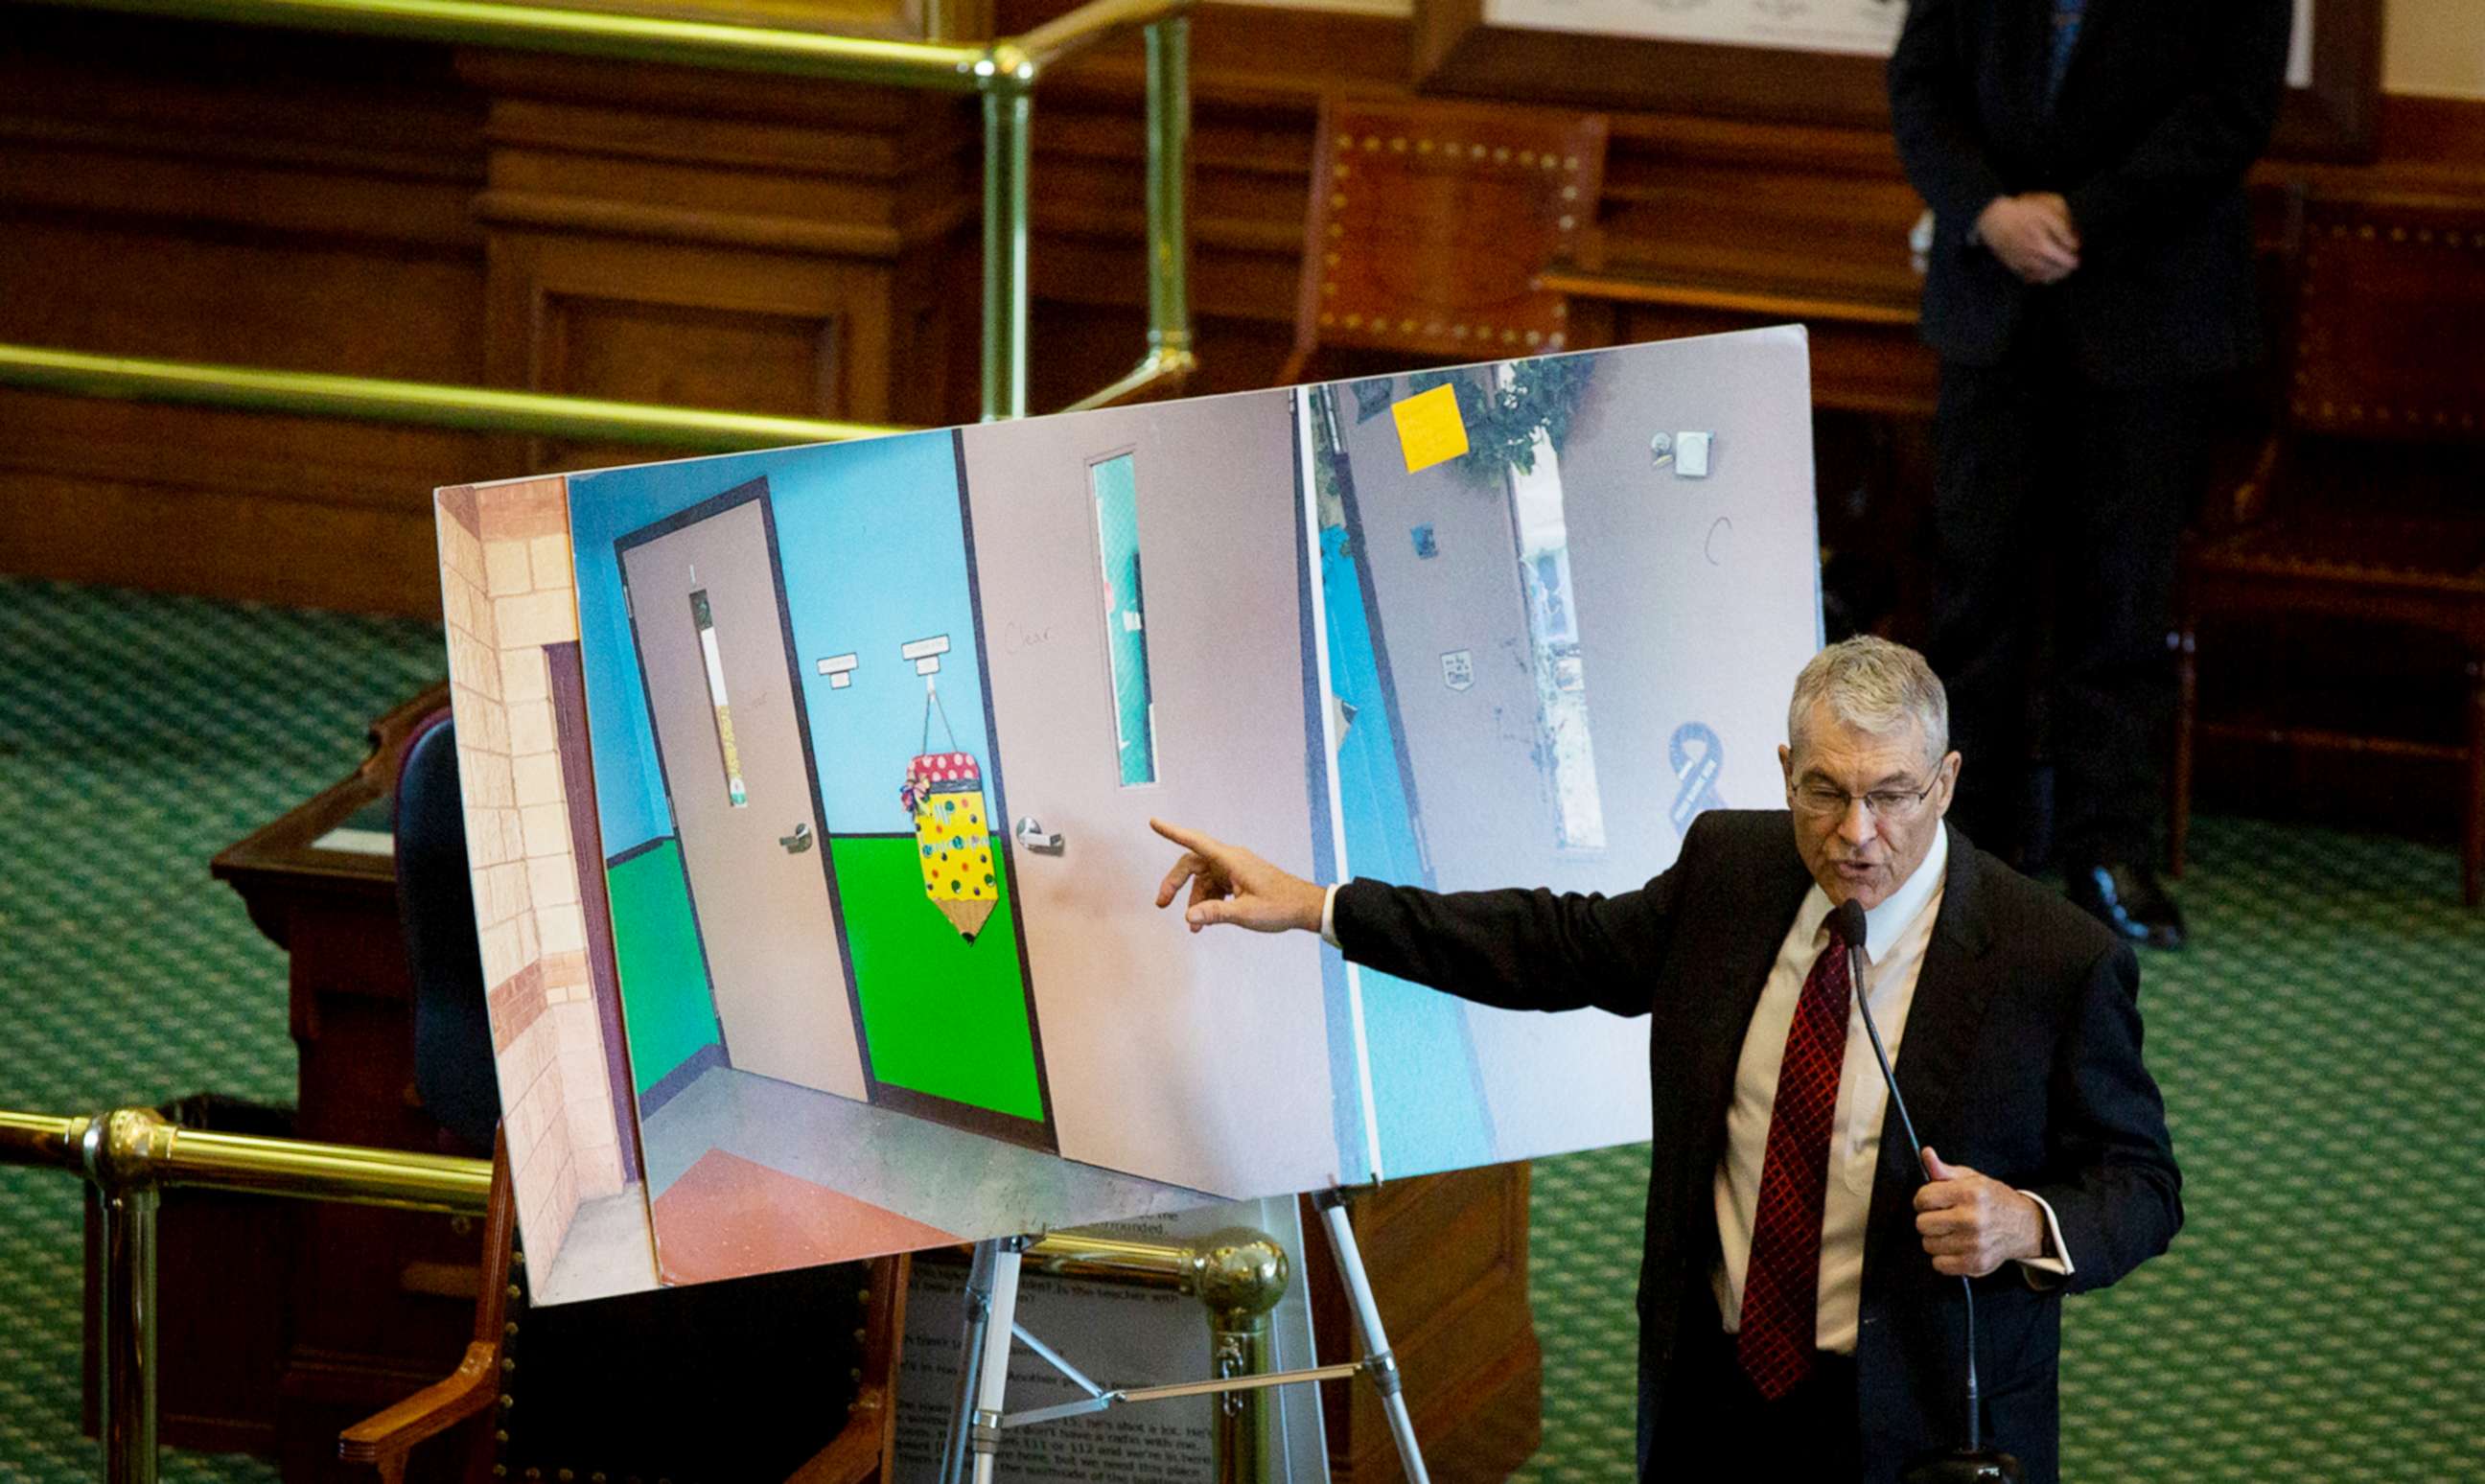 PHOTO: Department of Public Safety Director Steve McCraw uses photos of doors to present what happened during the school shooting at Robb Elementary School in Uvalde, during the hearing at the State Capitol in Austin, Texas, June 21, 2022.